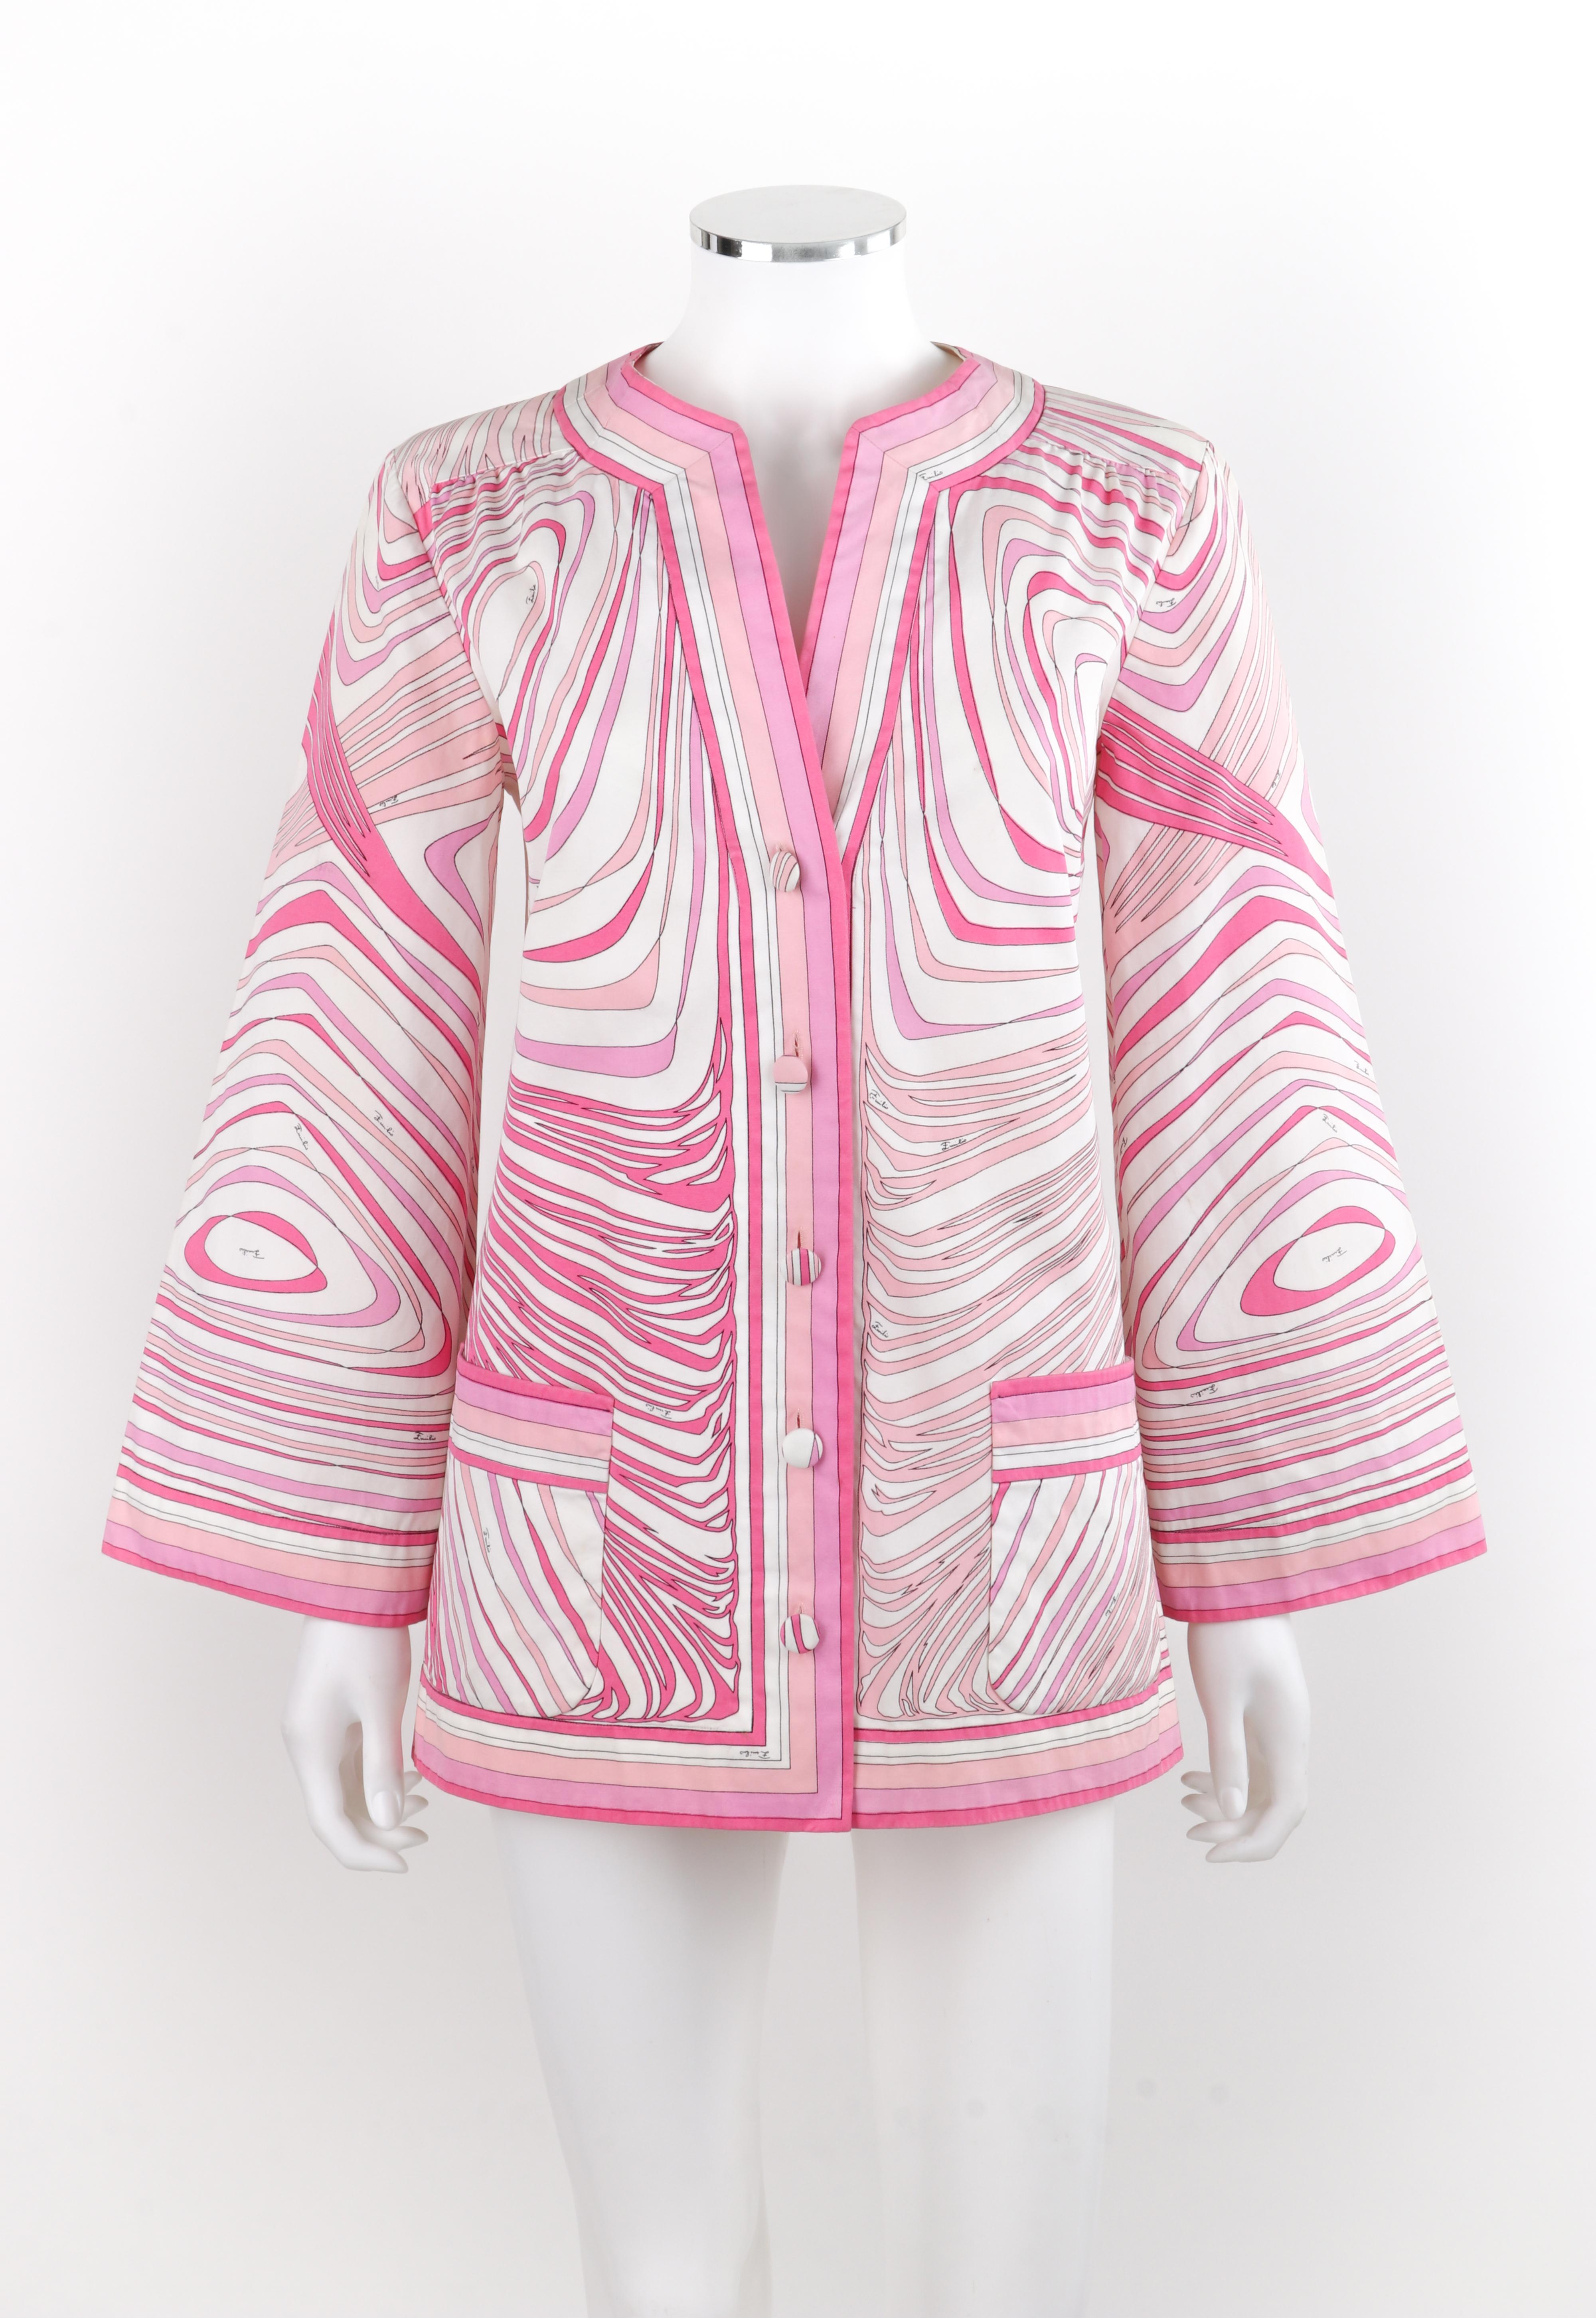 Brand / Manufacturer: Emilio Pucci
Circa: 1960's
Designer: Emilio Pucci
Style: Jacket
Color(s): Shades of pink, white, black
Lined: No
Marked Fabric Content: 